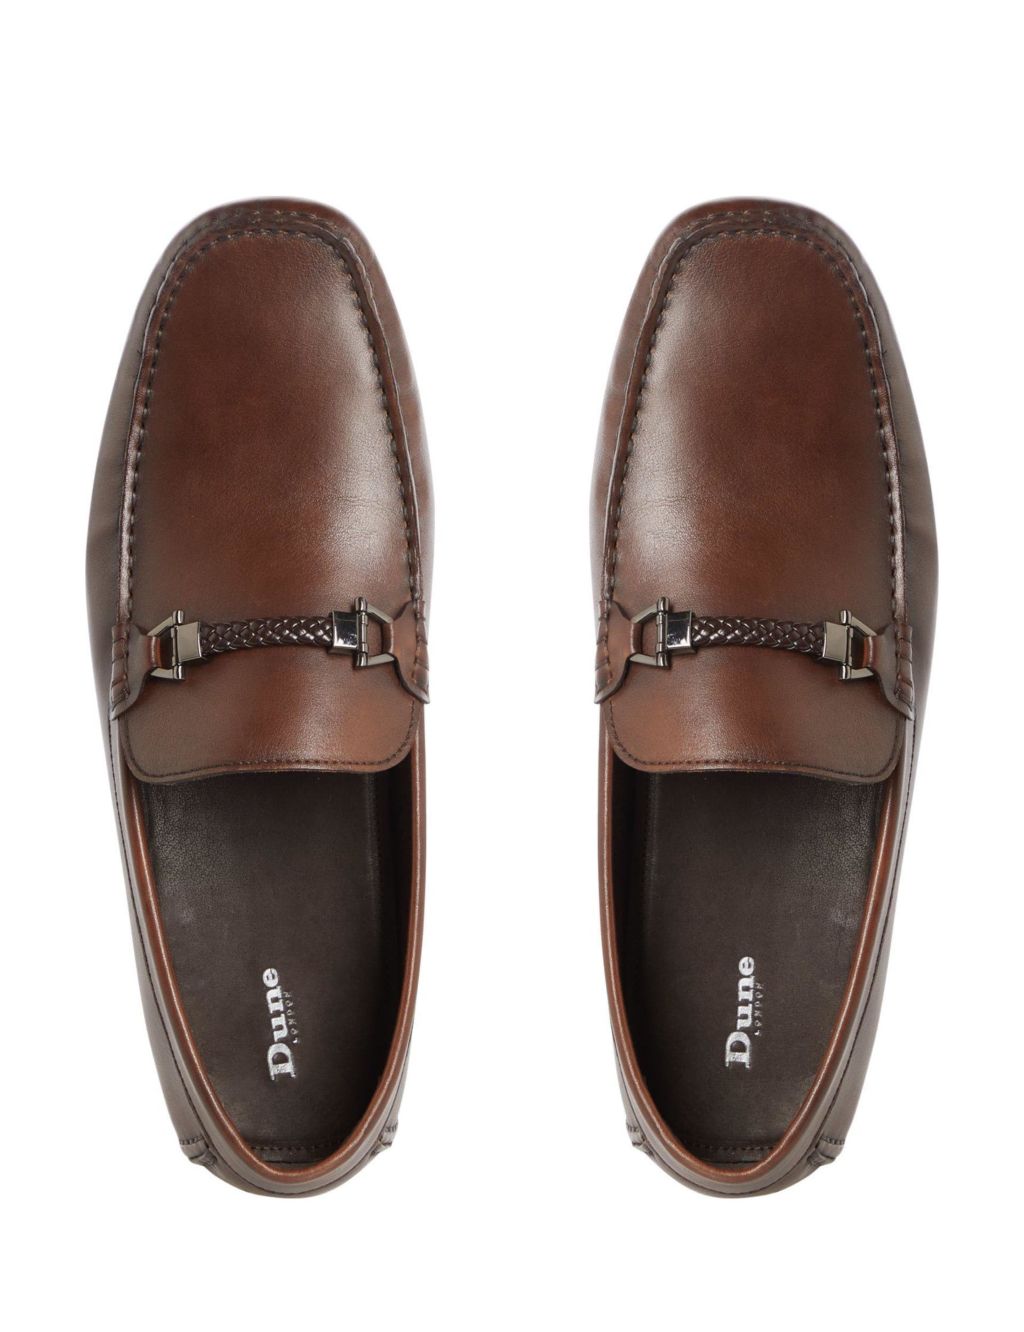 Leather Slip-On Loafers image 3